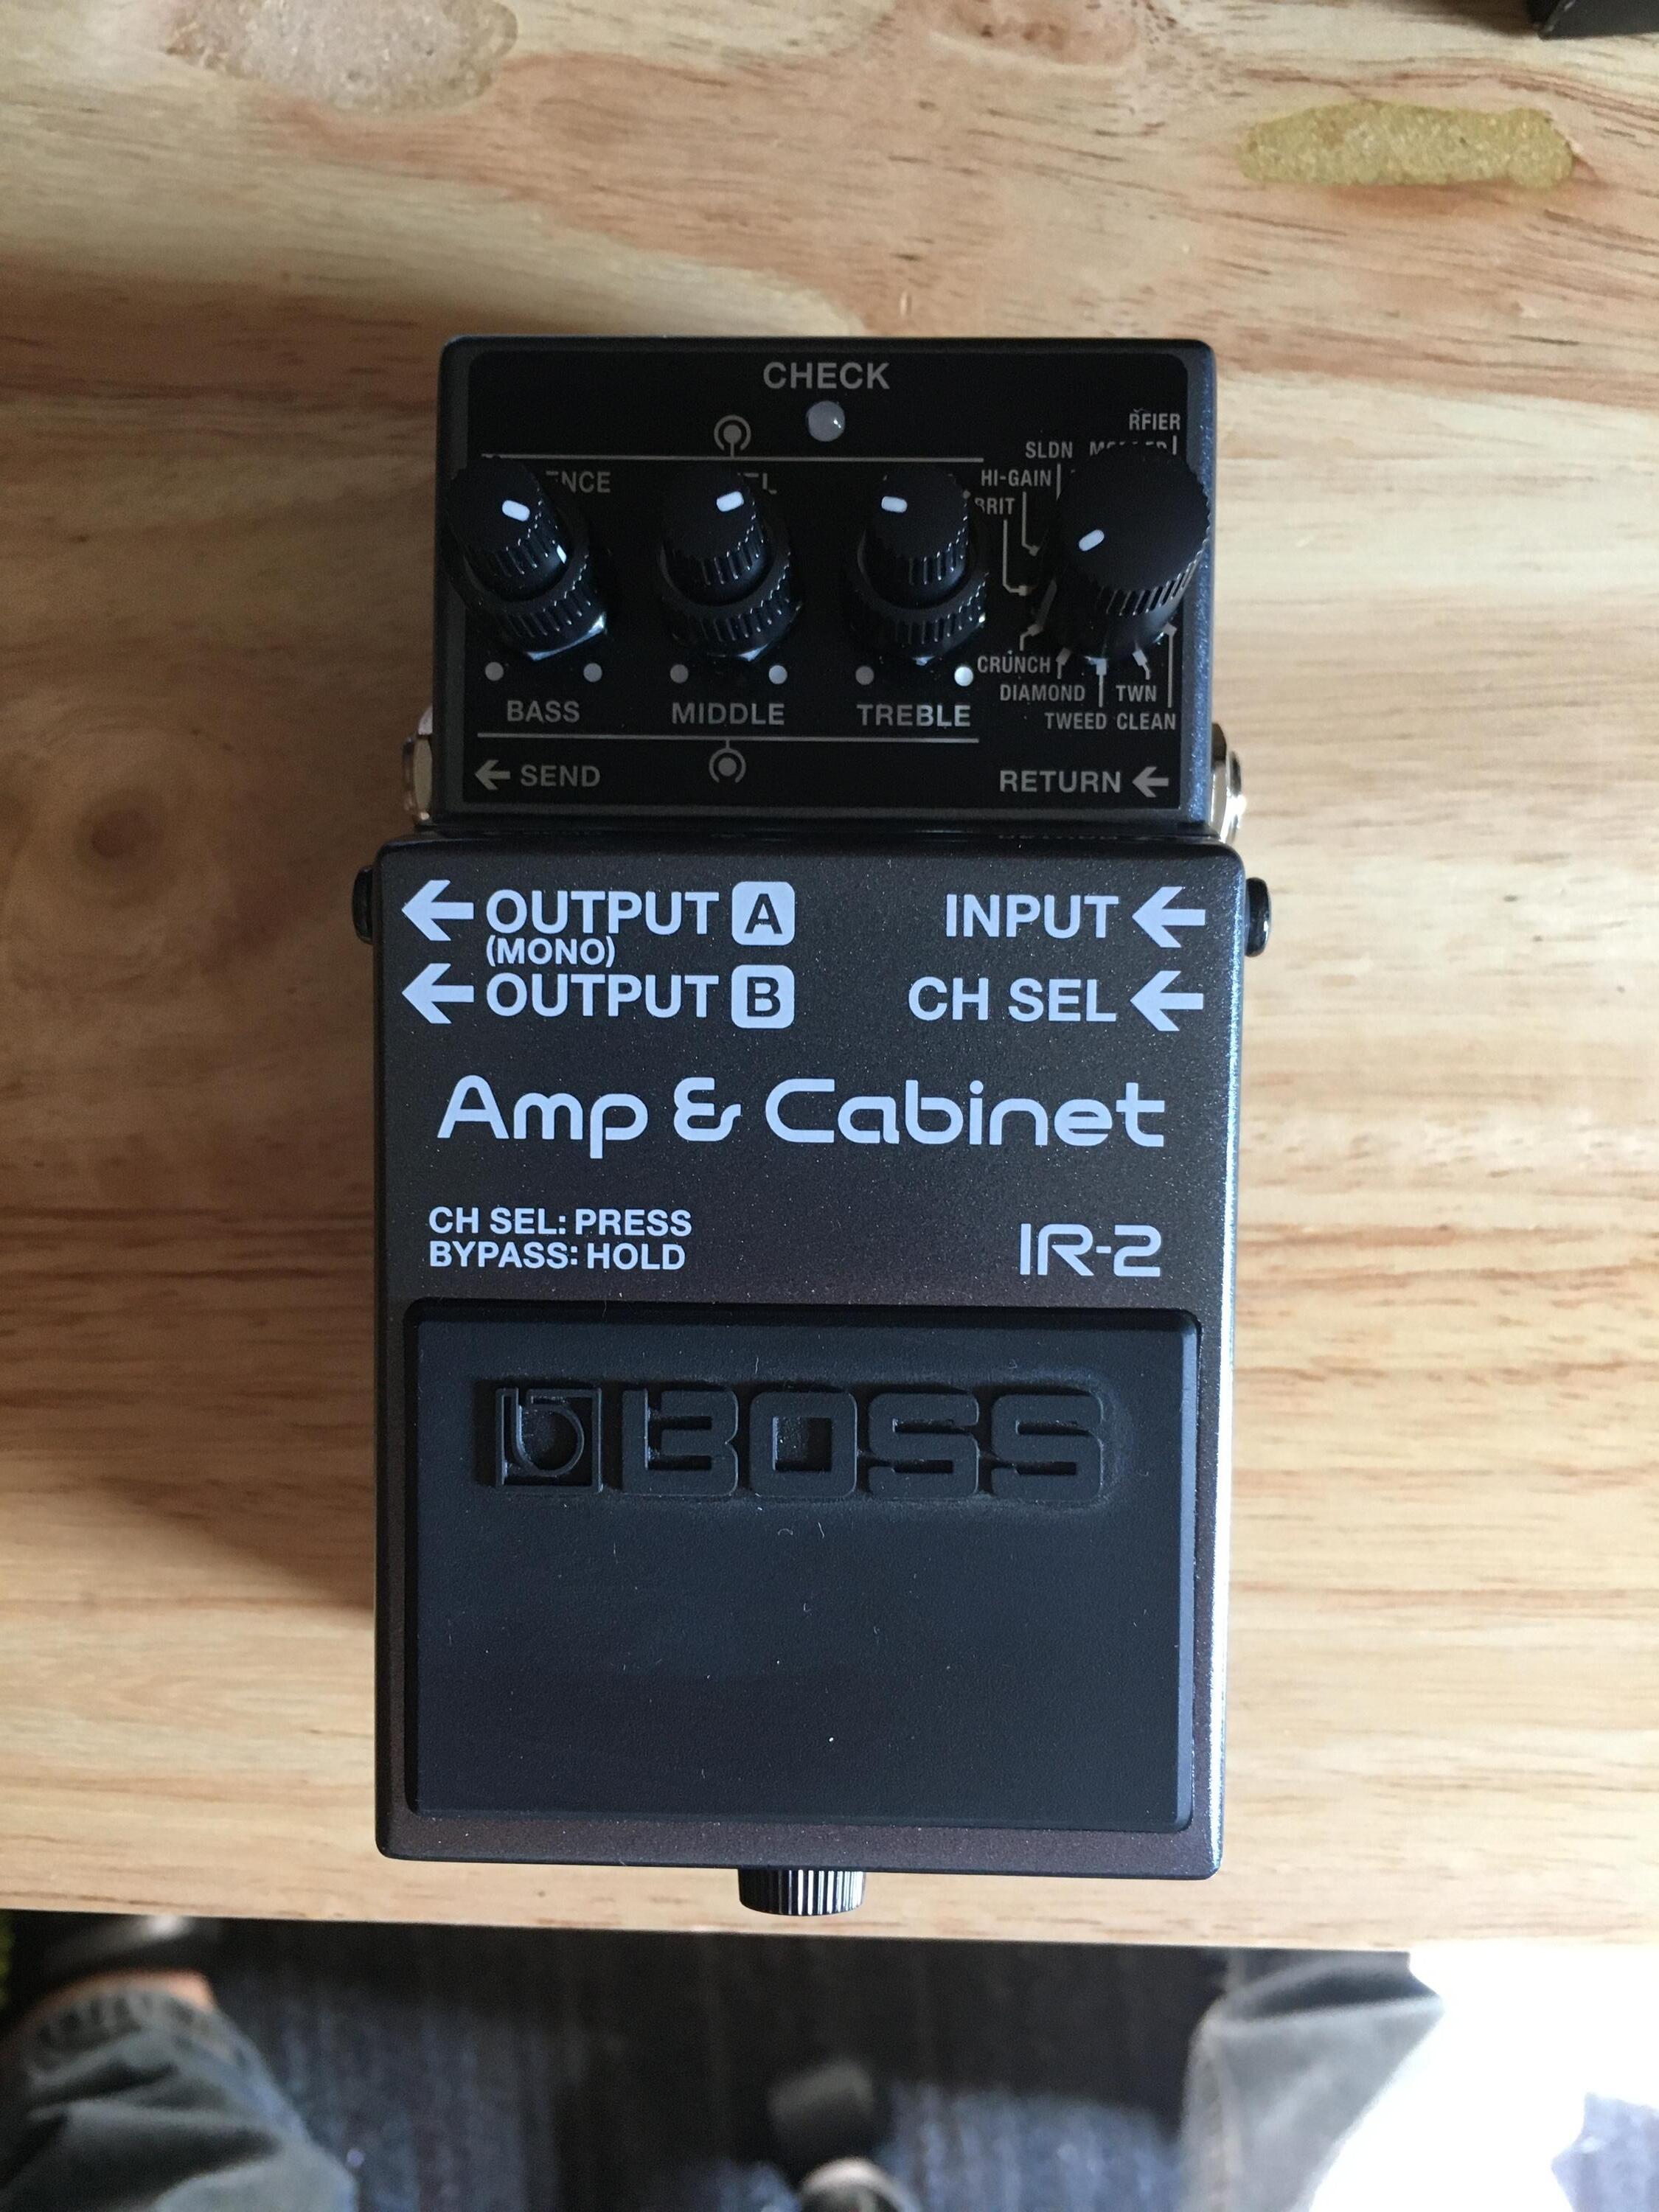 Used Boss IR-2 Amp and IR Cabinet Pedal - Sweetwater's Gear Exchange